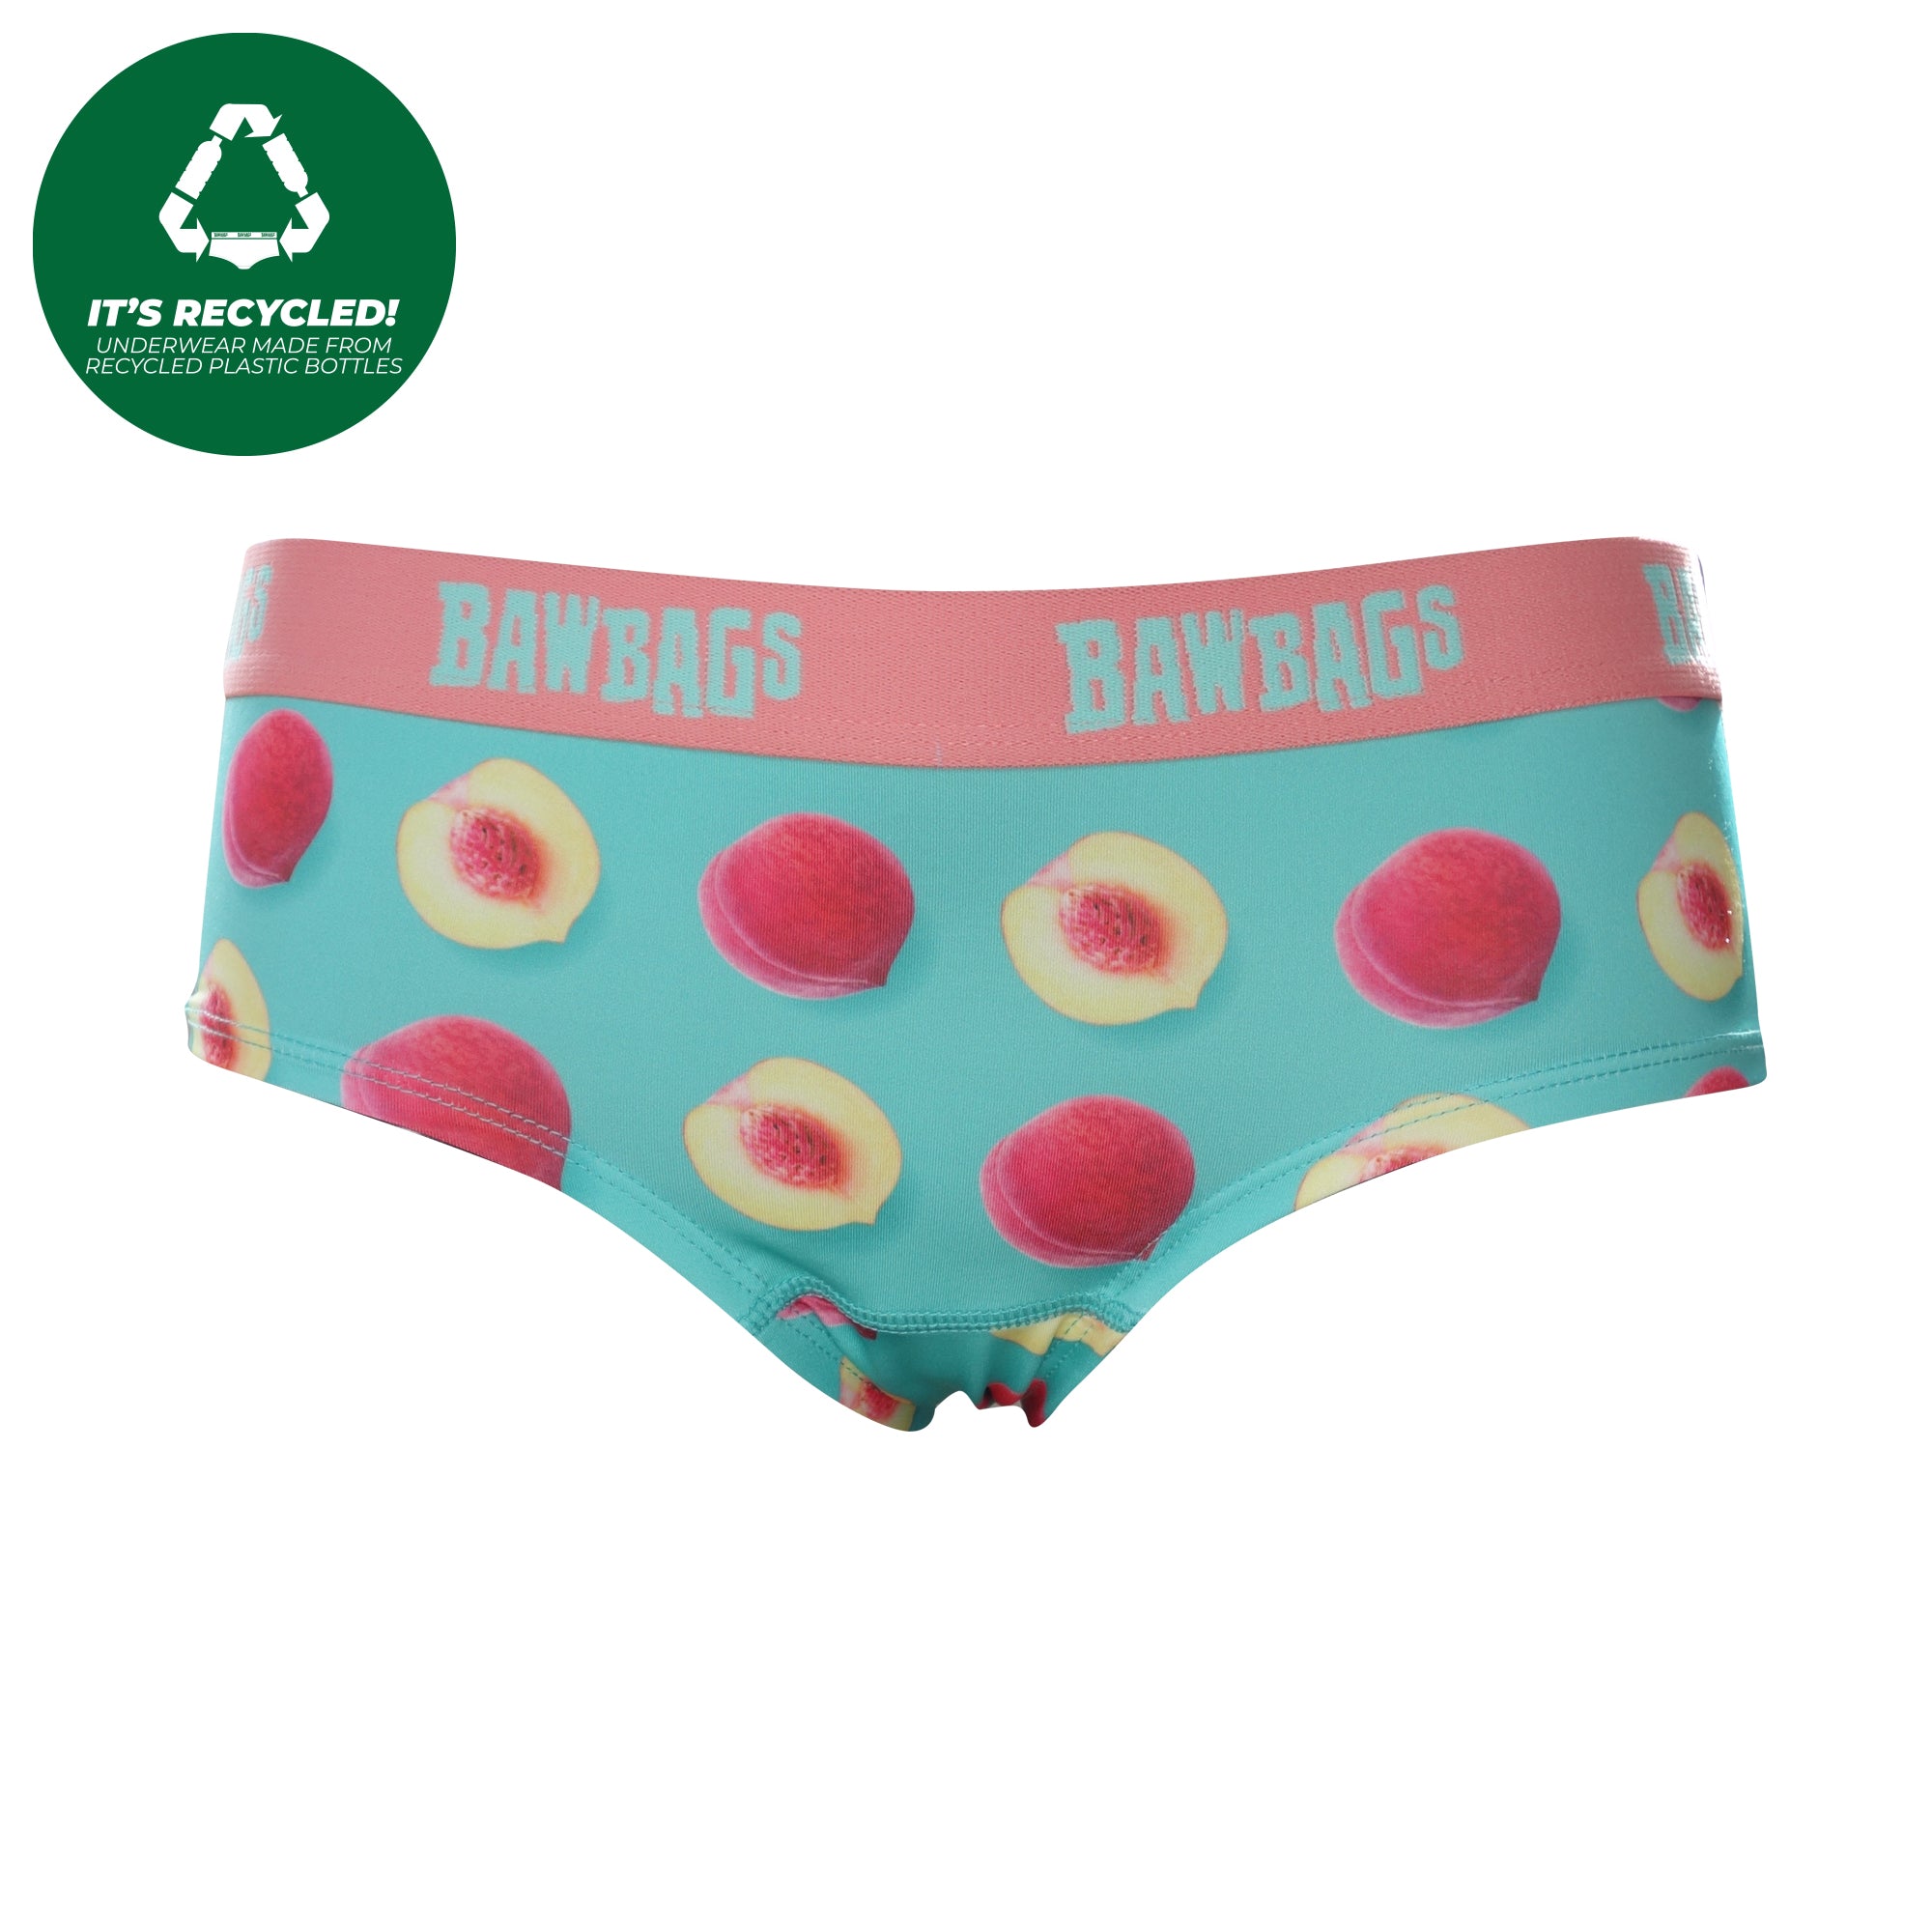 Pink panties - Colourful and funny matching socks, hats and underwear, Made in Poland